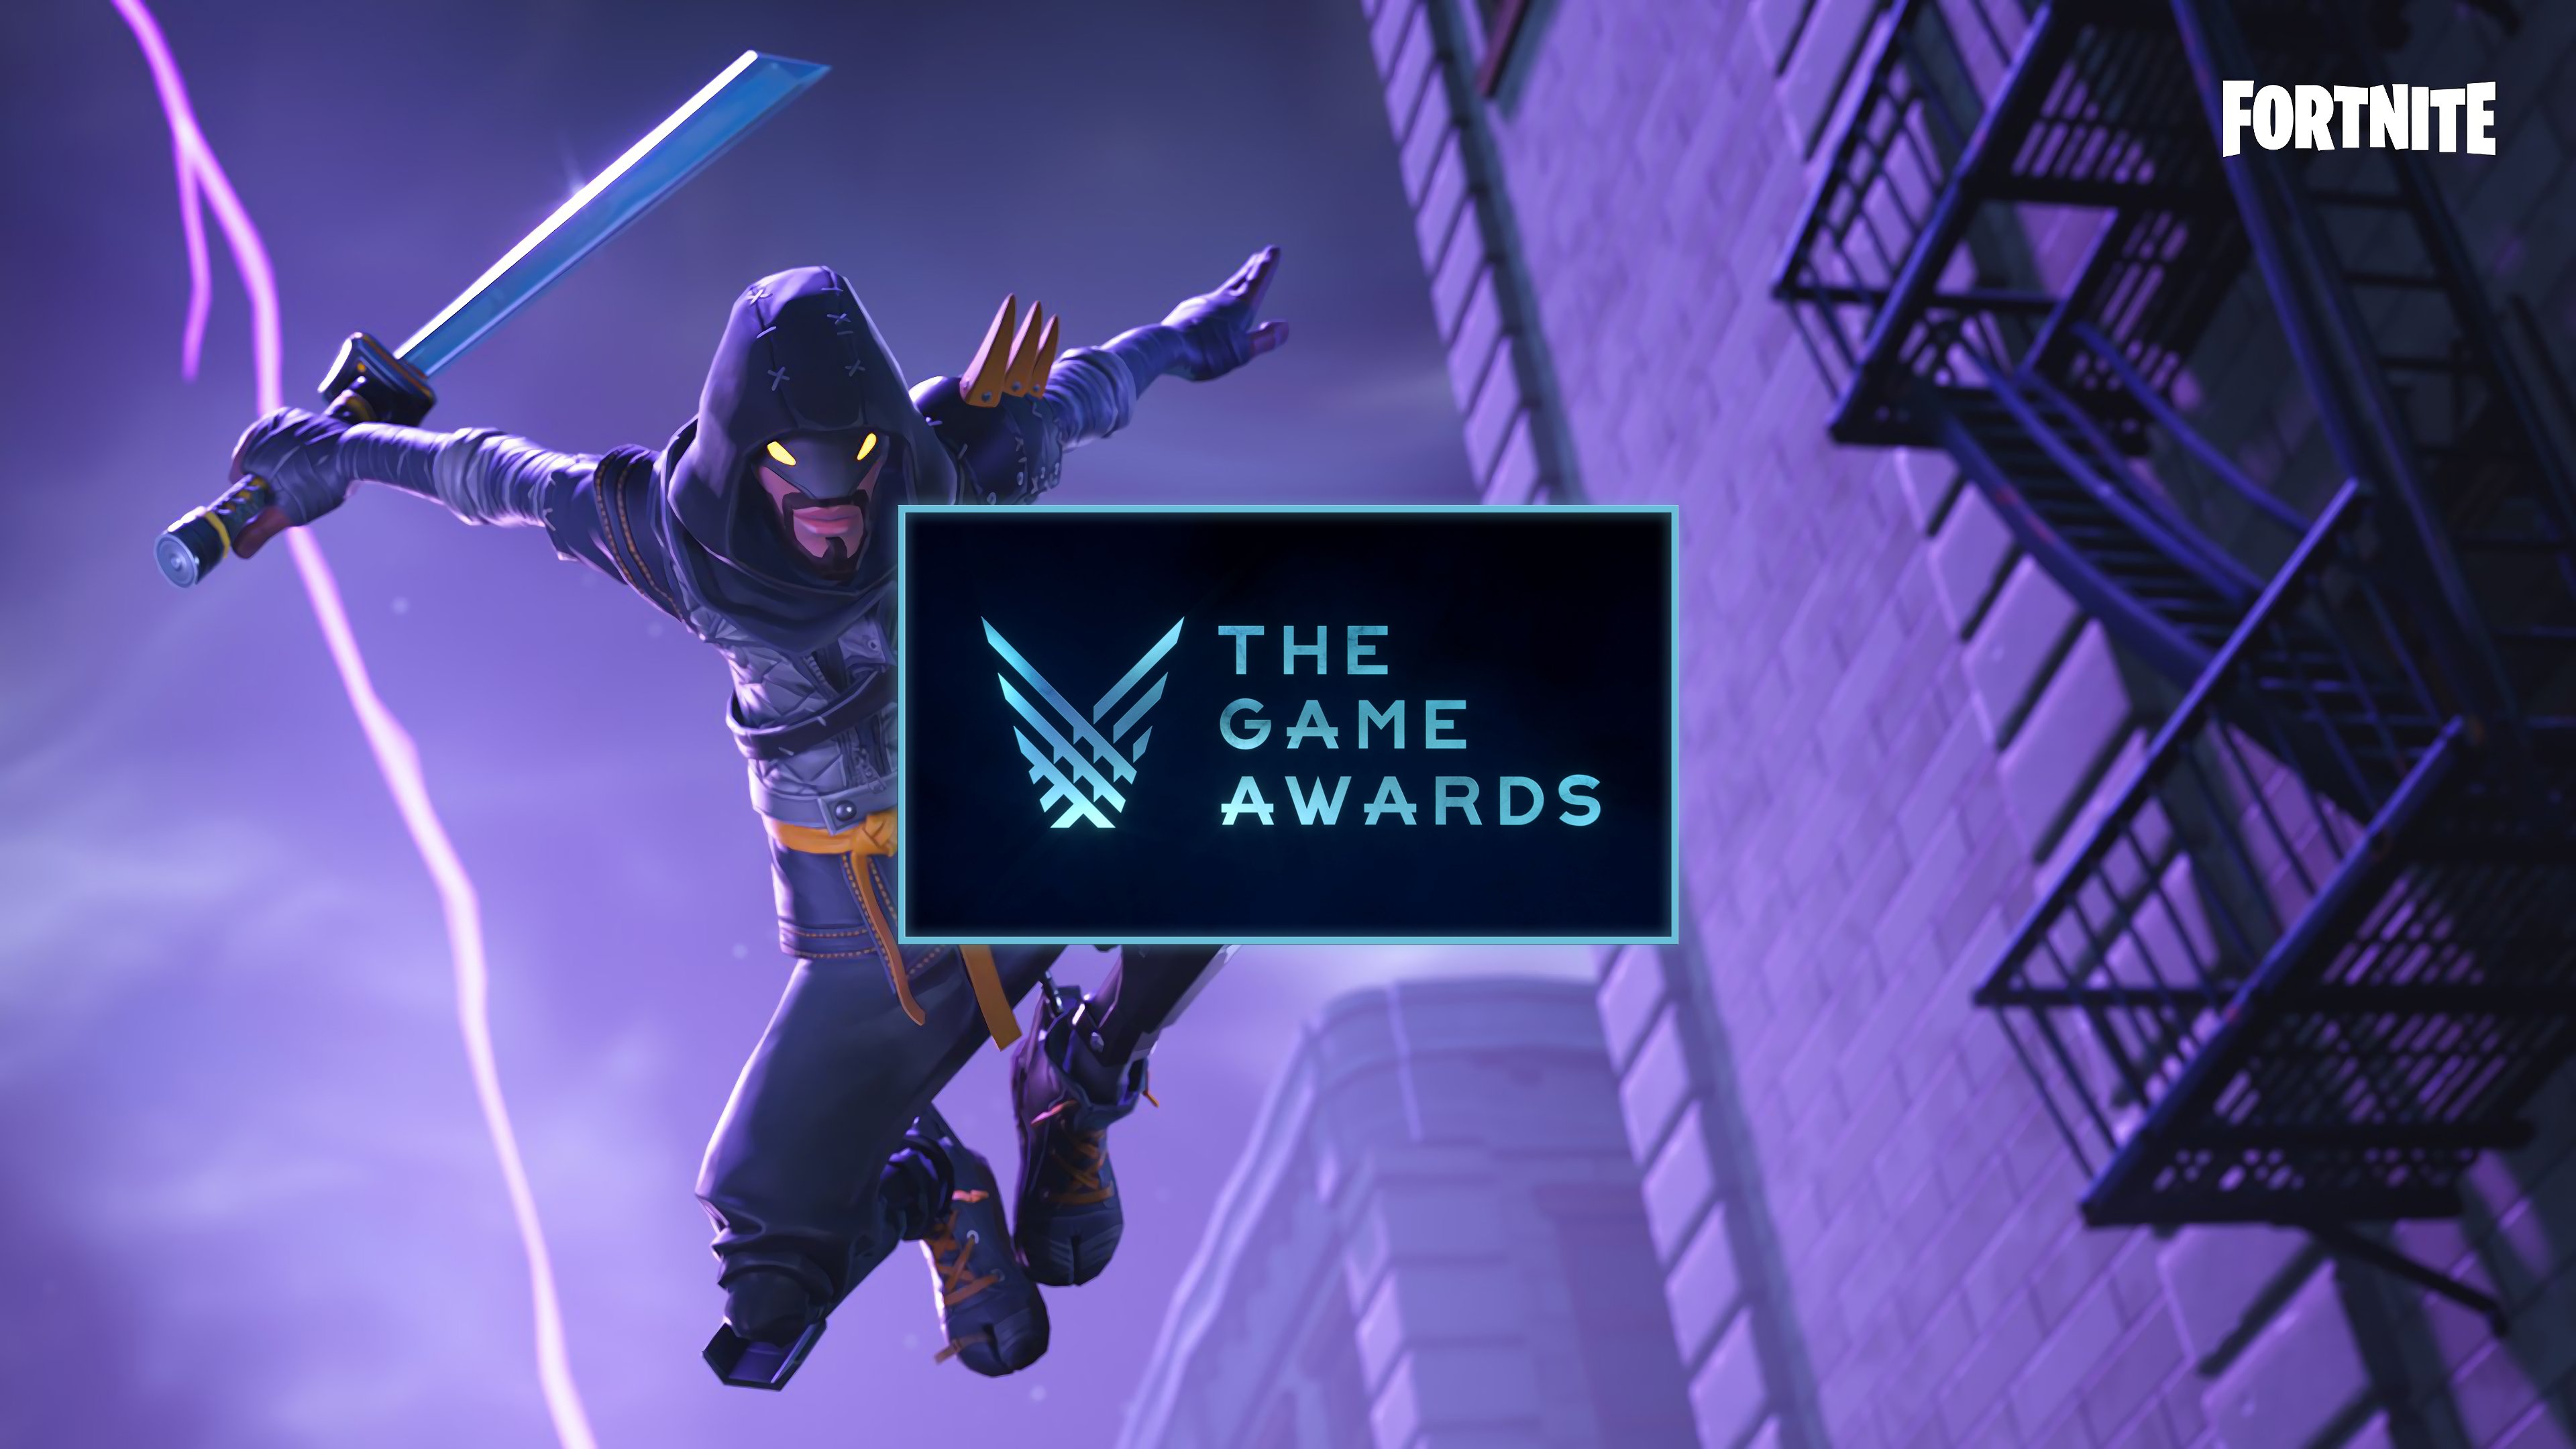 The Game Awards 2018 to Feature a Major Fortnite Announcement